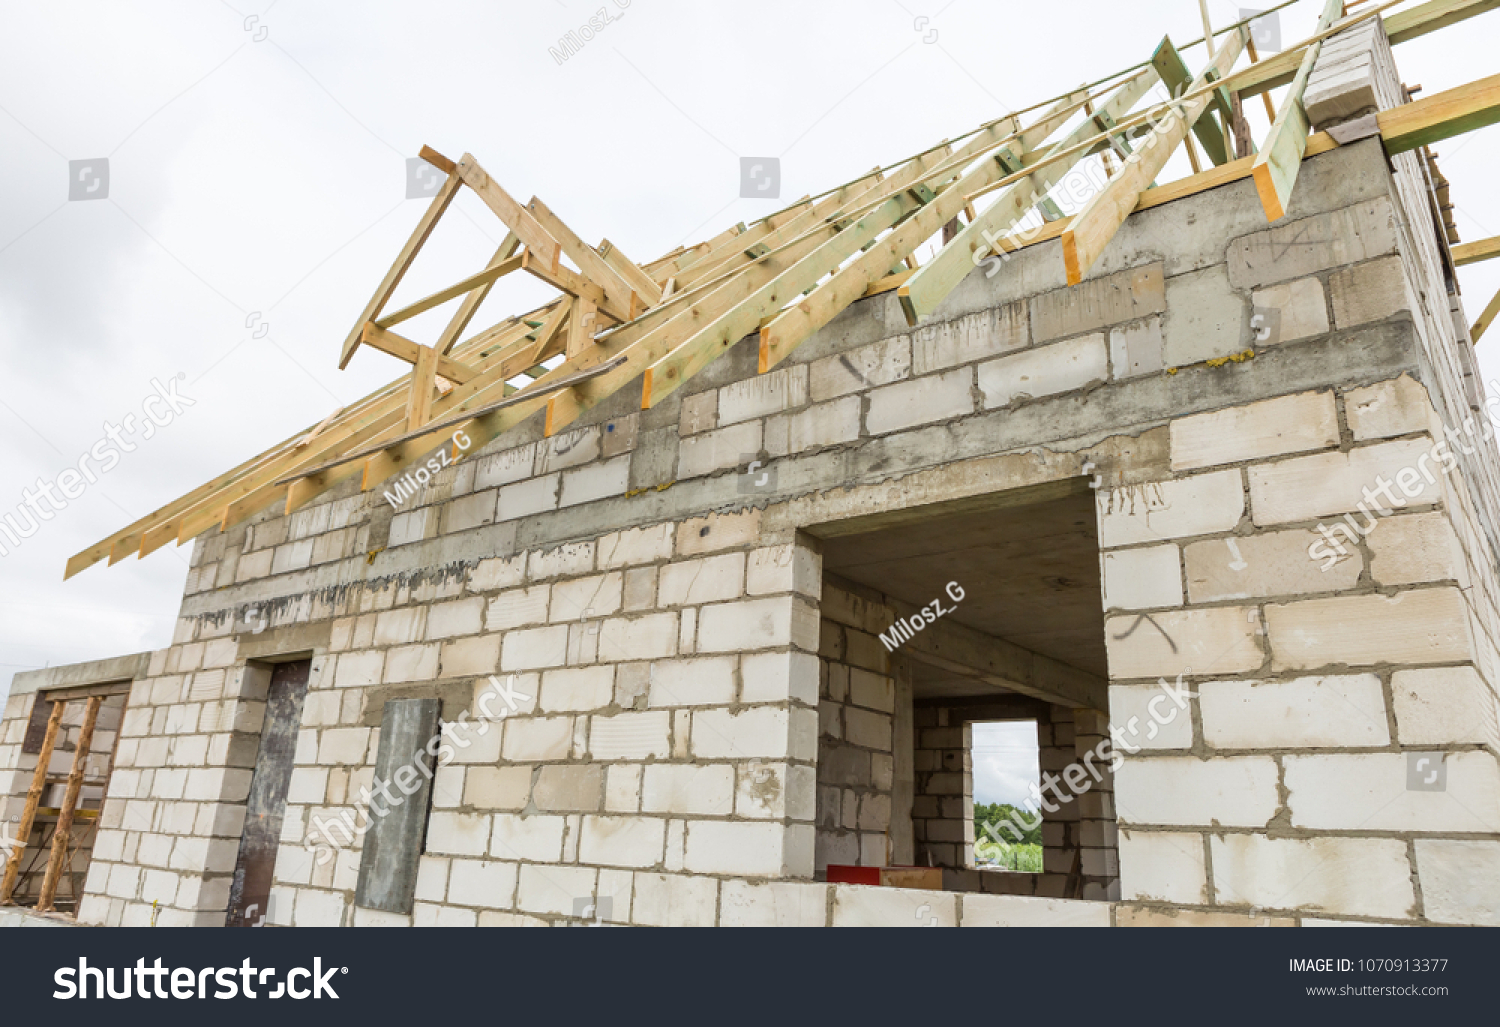 Unfinished House Countryside Part House Wooden Stock Photo 1070913377 | Shutterstock